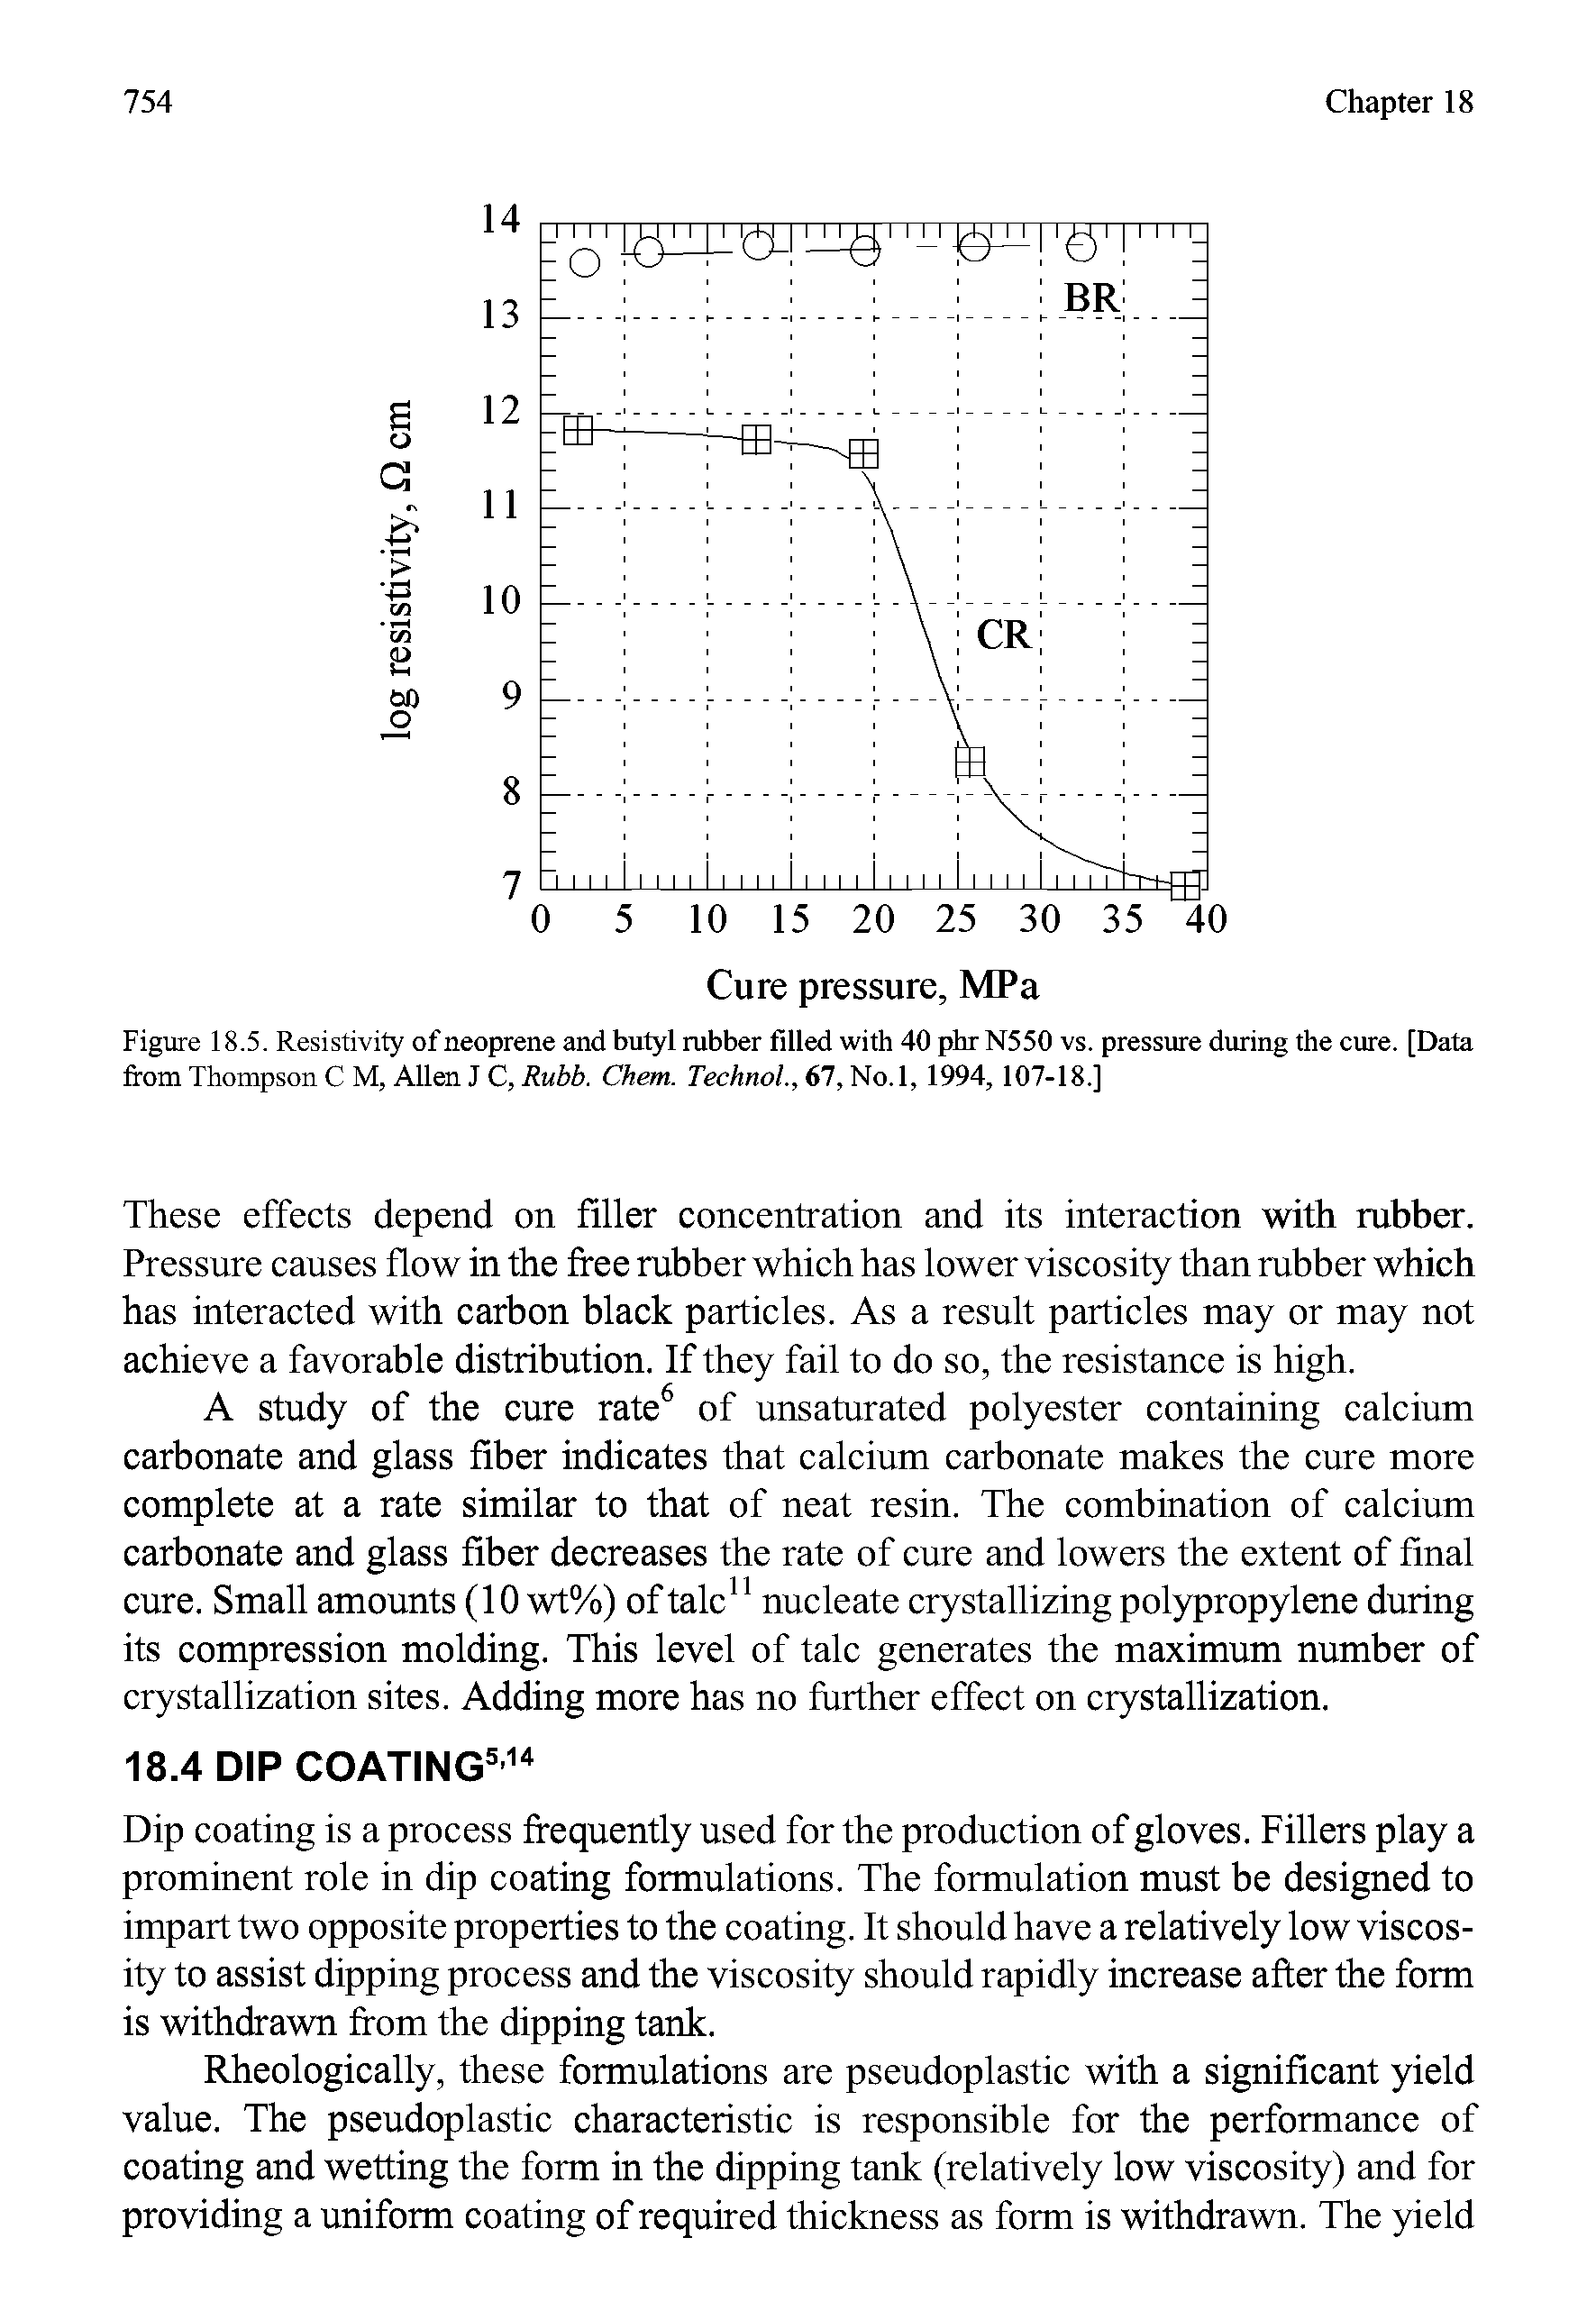 Figure 18.5. Resistivity of neoprene and butyl rubber filled with 40 phr N550 vs. pressure during the cure. [Data from Thompson C M, Allen J C, Rubb. Chem. Technol., 67, No.l, 1994, 107-18.]...